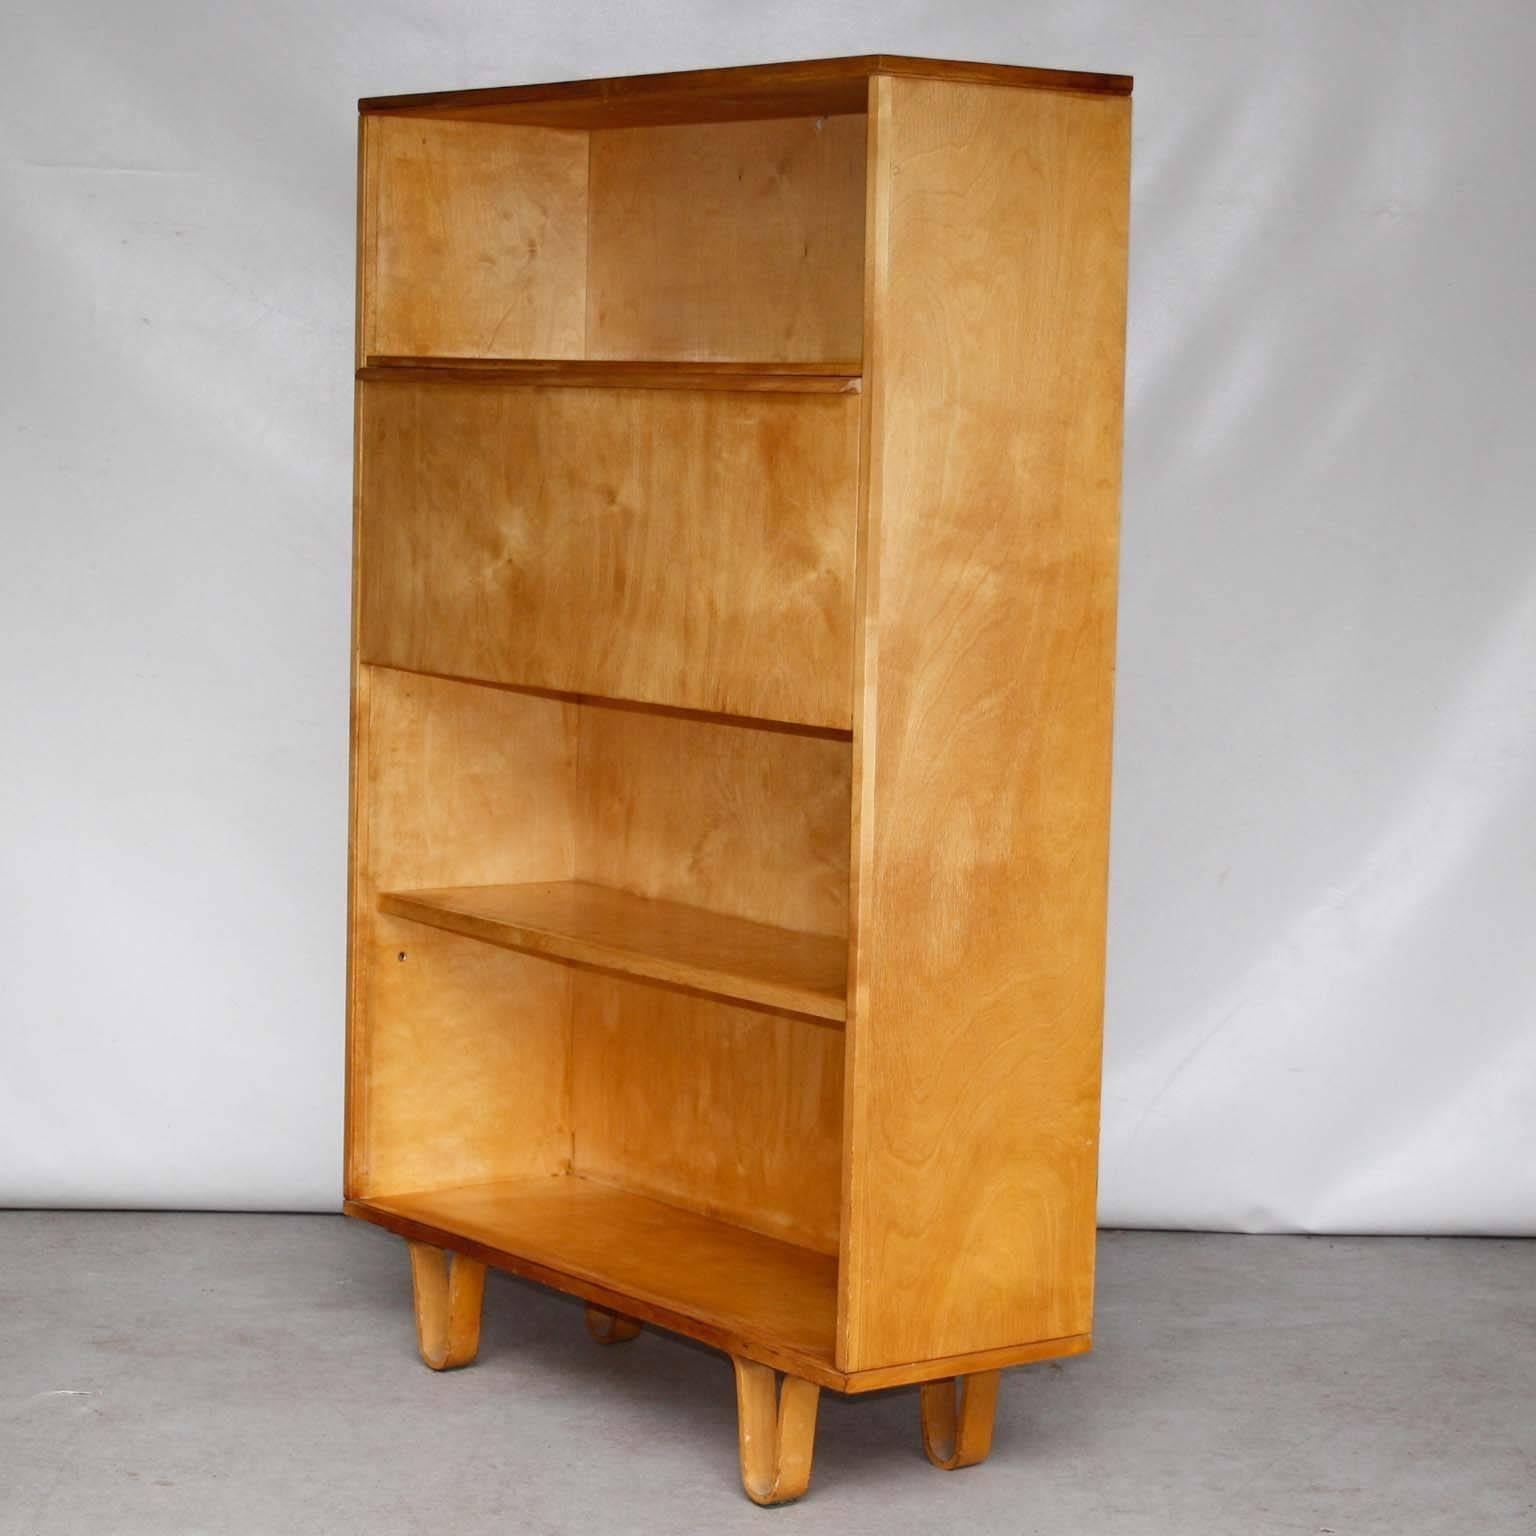 A secretaire designed by Cees Braakman for Pastoe in the Netherlands, 1951.

This secretaire is from the well-known birch series. The birch series of Cees Braakman is becoming increasingly popular in Europe nowadays. Cees Braakman was inspired by